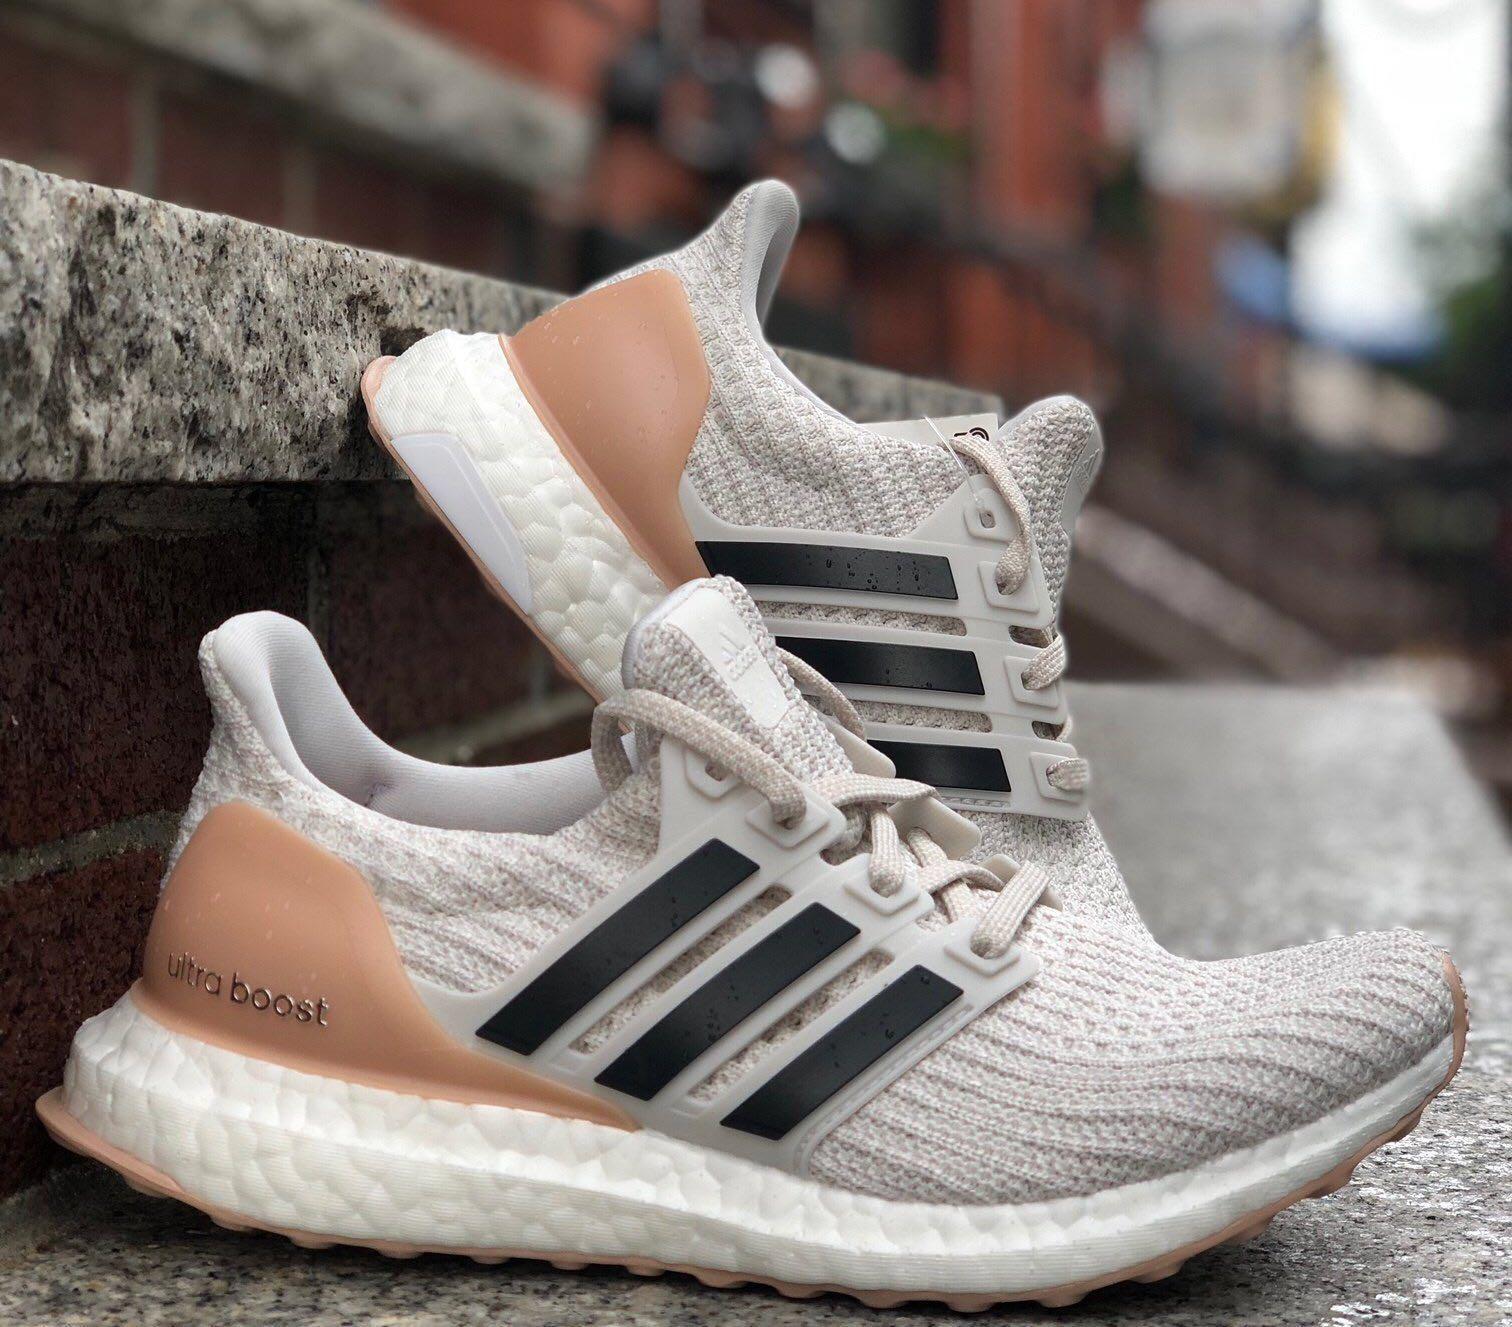 adidas ultra boost 4.0 show your stripes cloud white